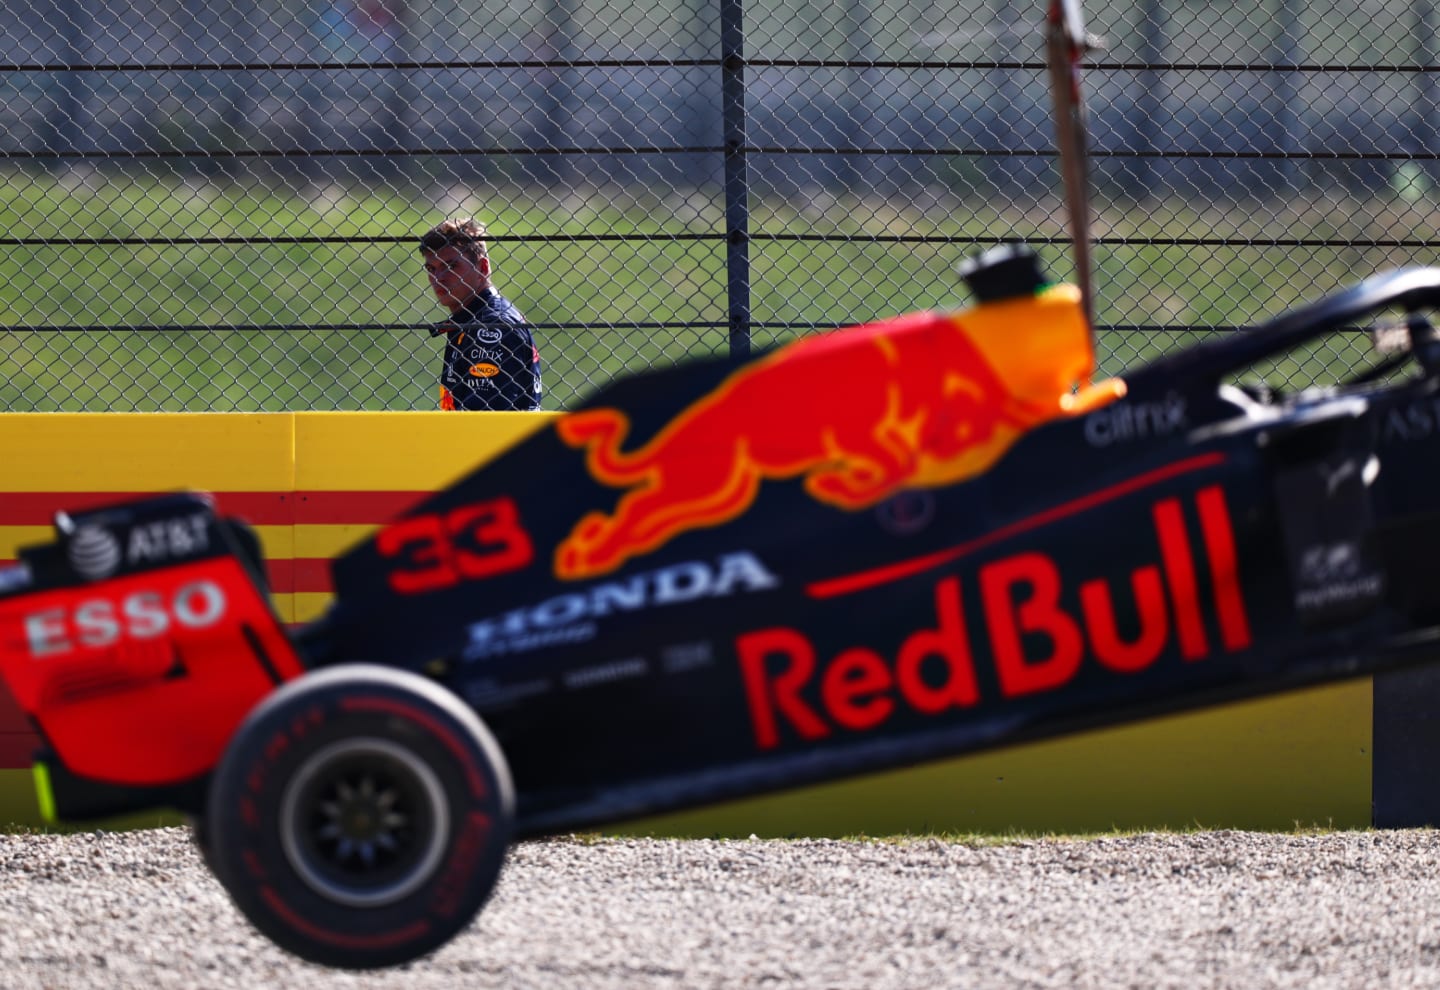 SCARPERIA, ITALY - SEPTEMBER 13: Max Verstappen of Netherlands and Red Bull Racing looks on as his